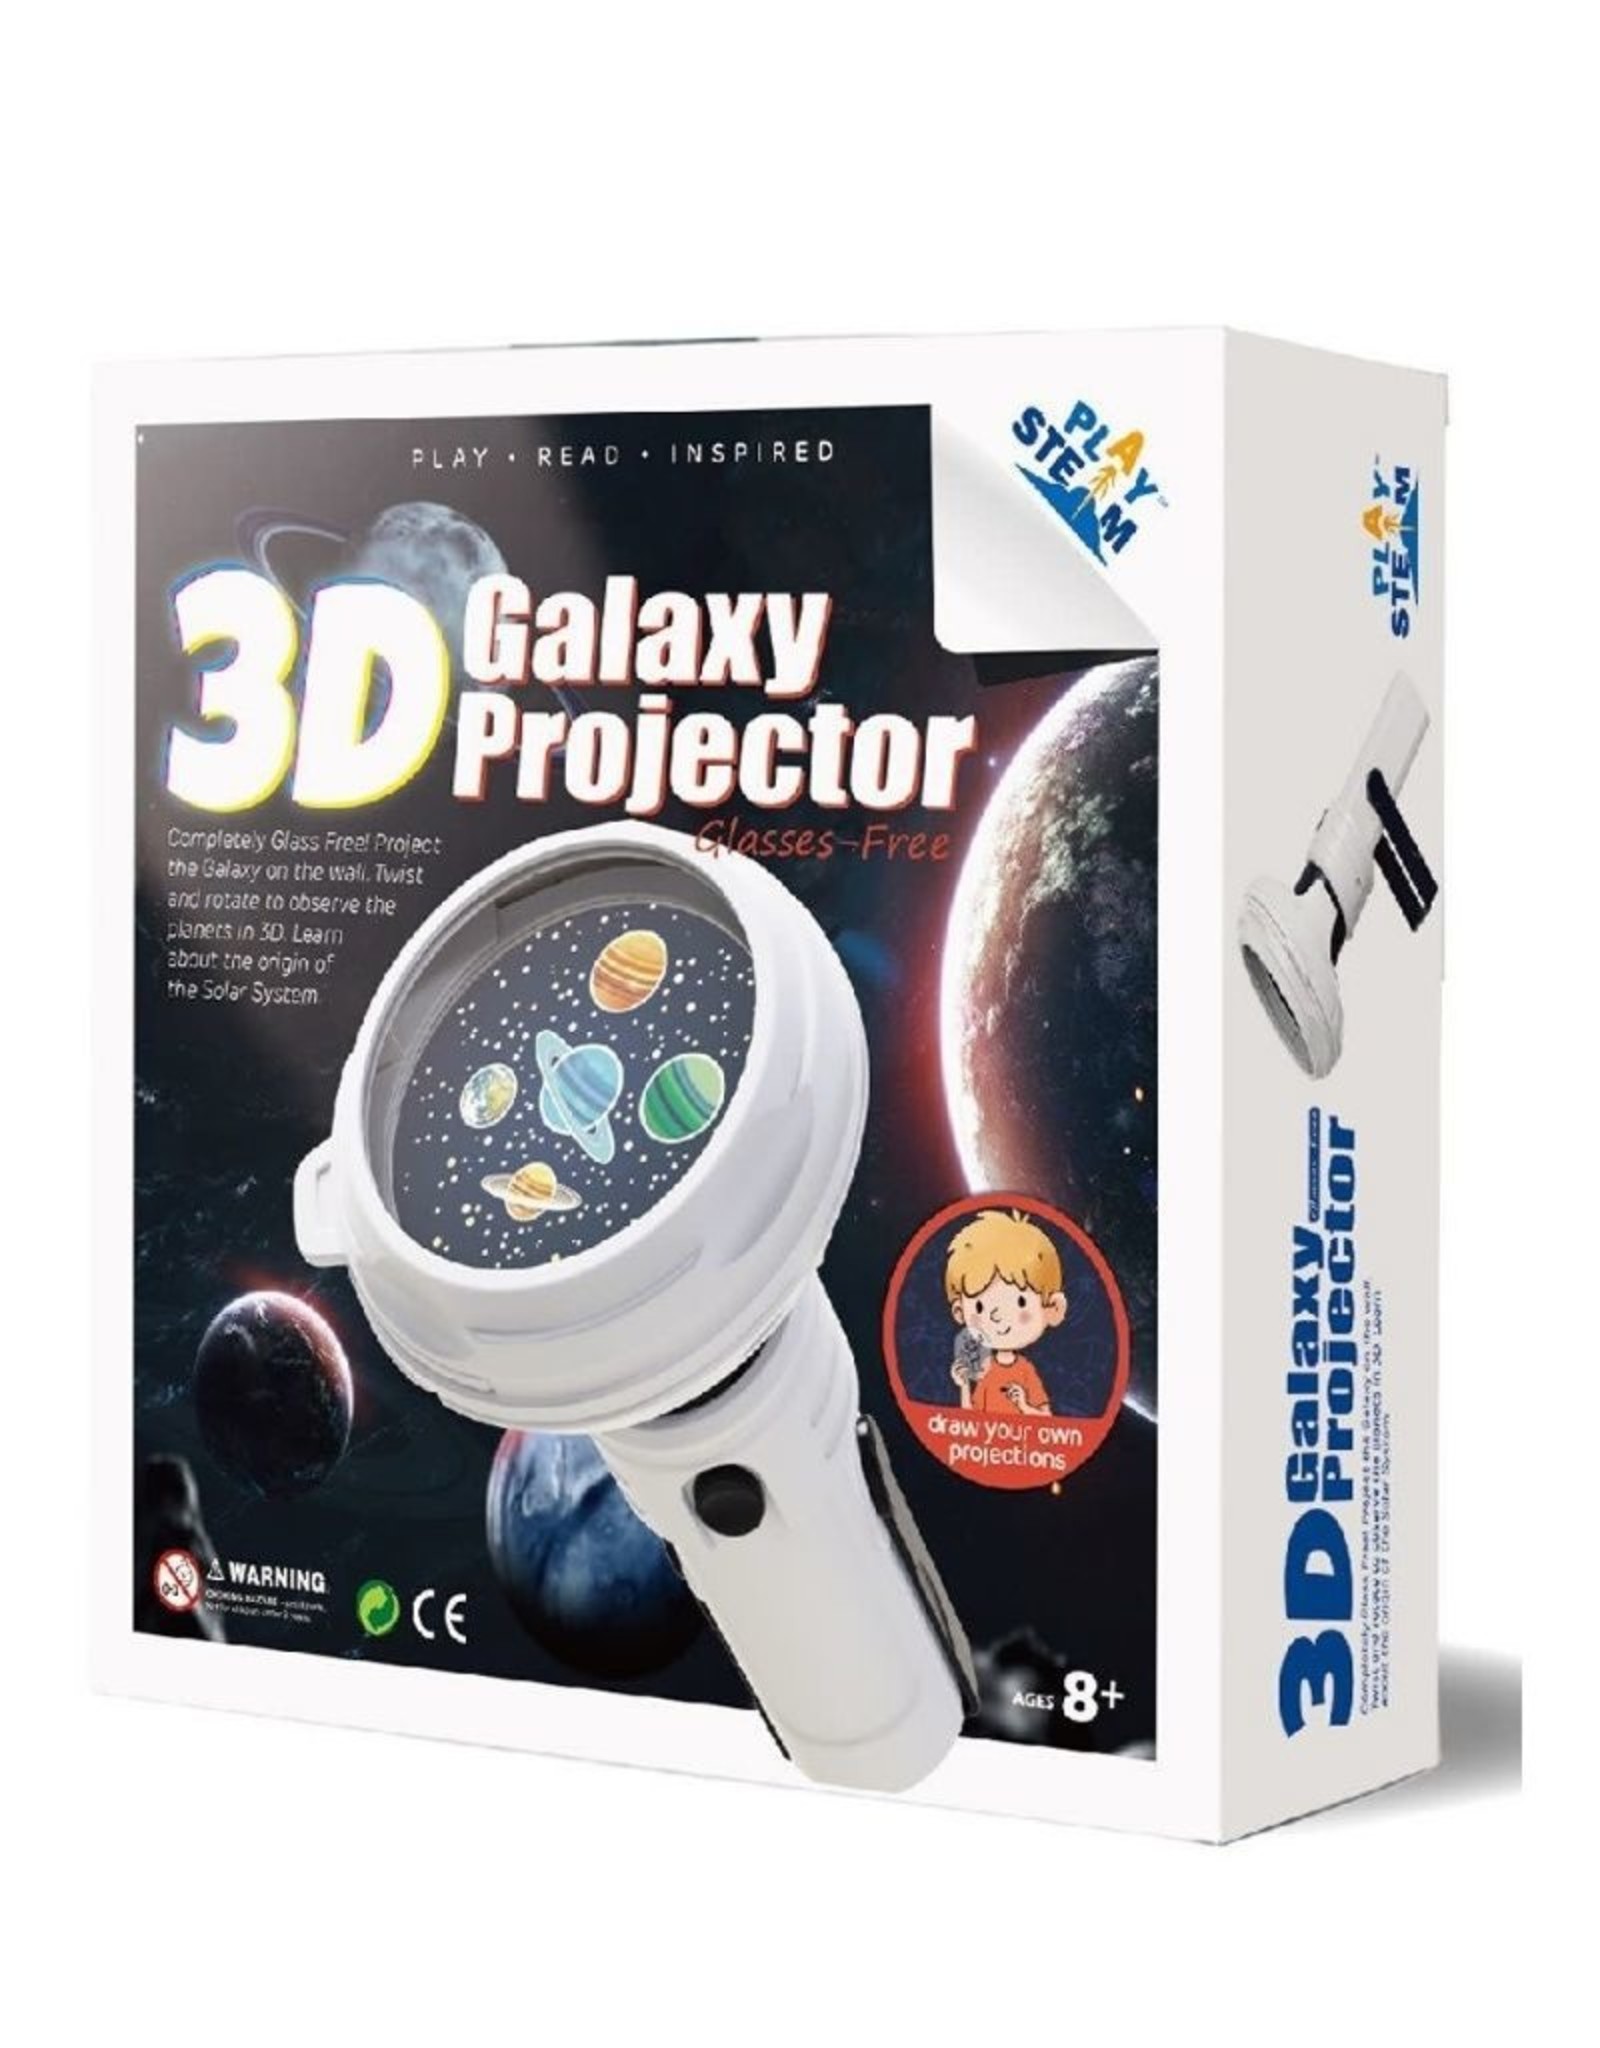 3D Galaxy Projector - The Toy Store